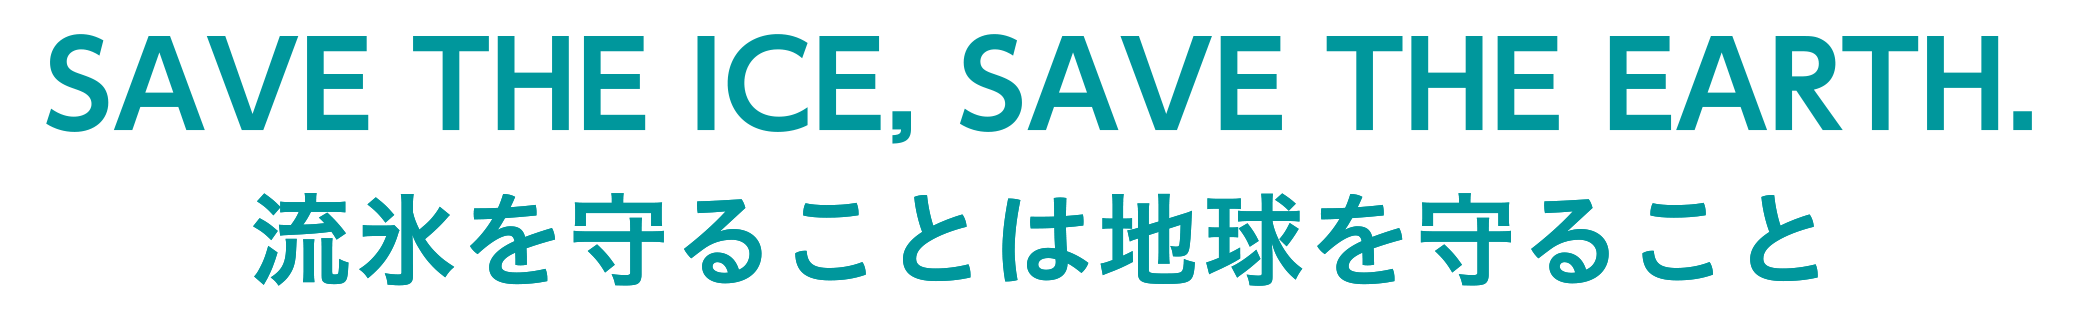 SAVE THE ICE, SAVE THE EARTH. 流氷を守ることは地球を守ること